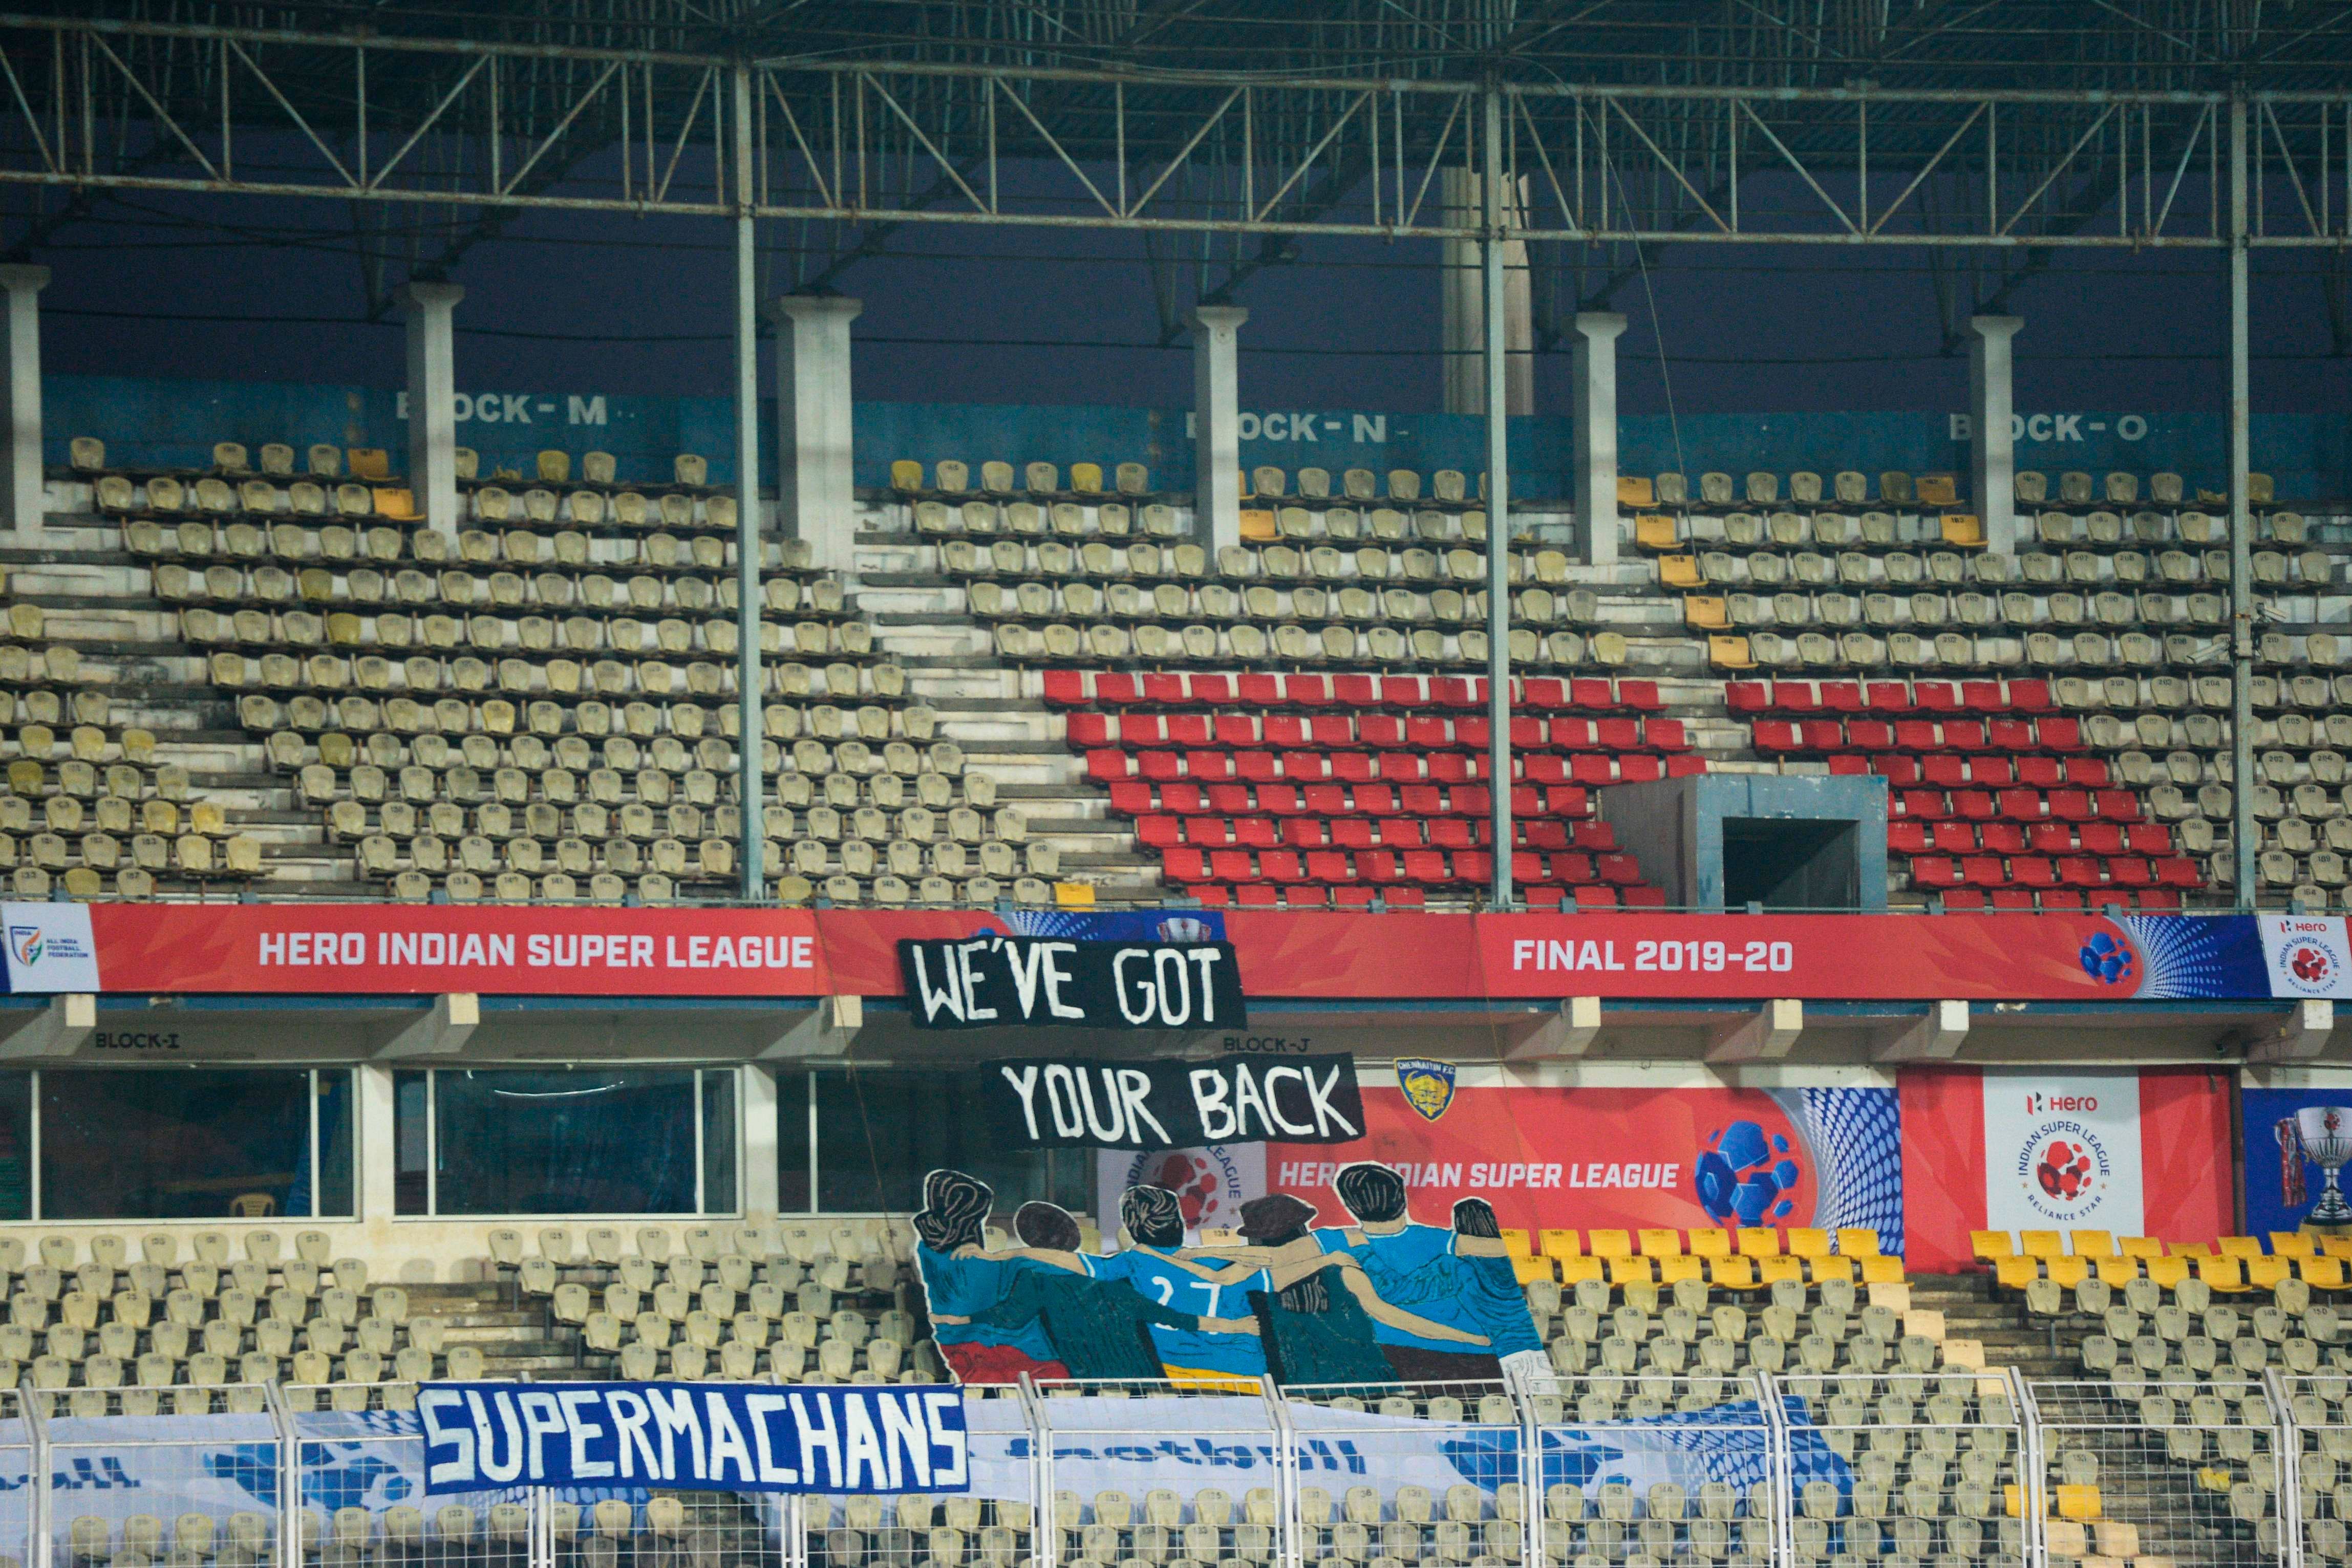 Empty spectators enclosures are pictured amid concerns over the spread of the COVID-19 novel coronavirus, before the start of the final match between Chennaiyin FC and ATK FC at the Indian Super League (ISL) football tournament, in Goa. (AFP photo)